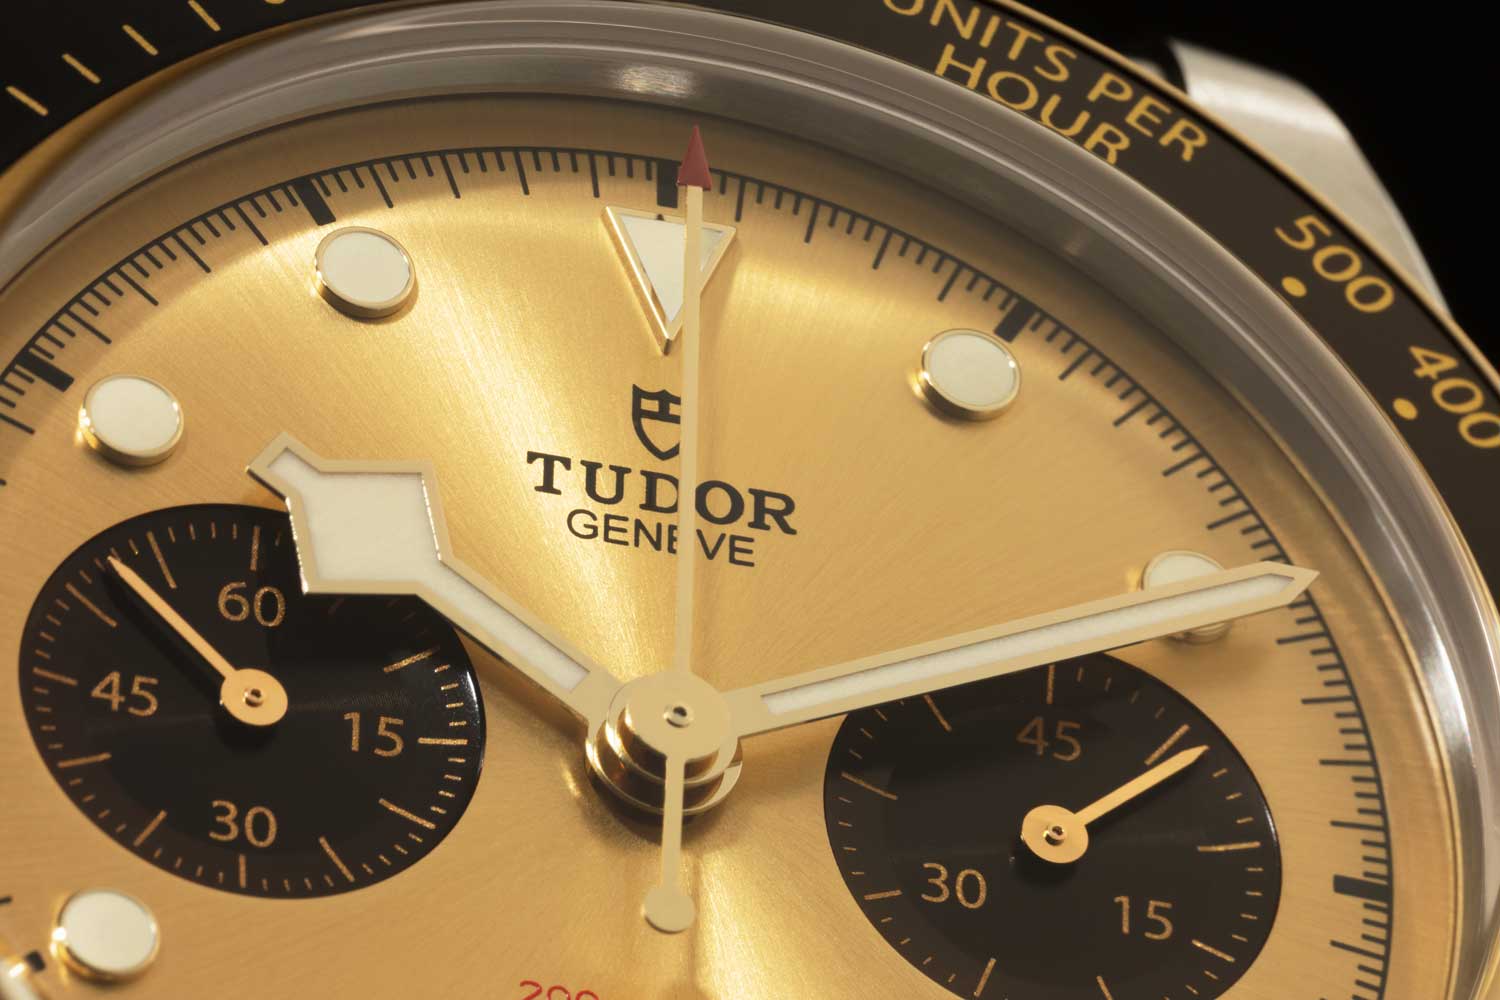 More gold tones can be found in the chronograph subdials. (image: Tudor)